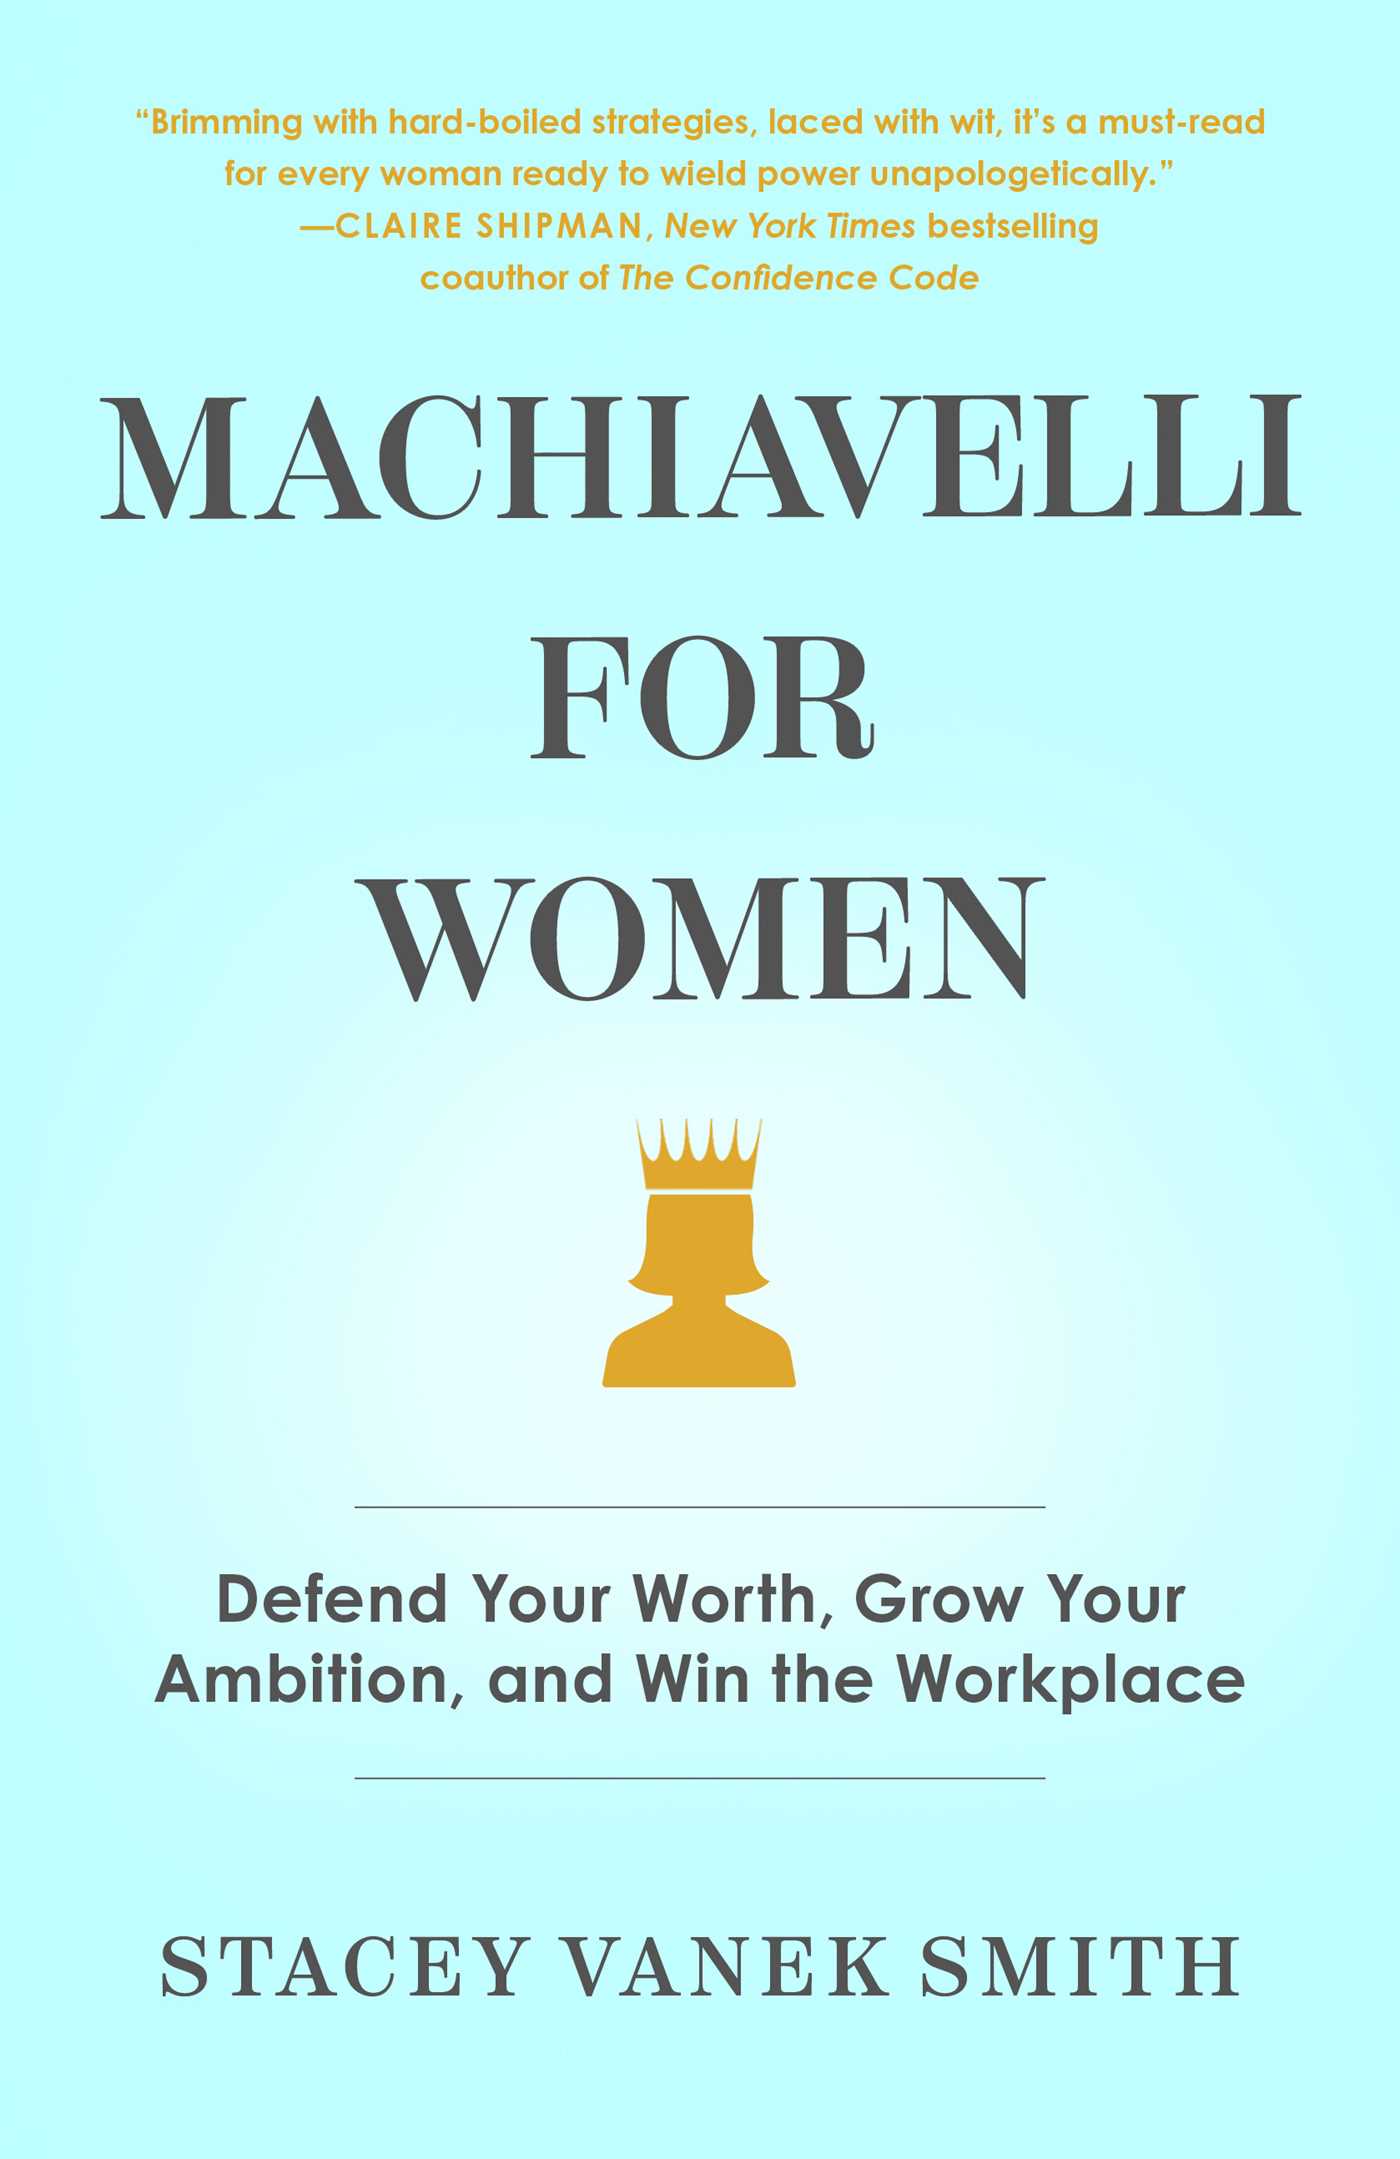 Book Launch: Machiavelli for Women by Stacey Vanek Smith in conversation with Cardiff Garcia